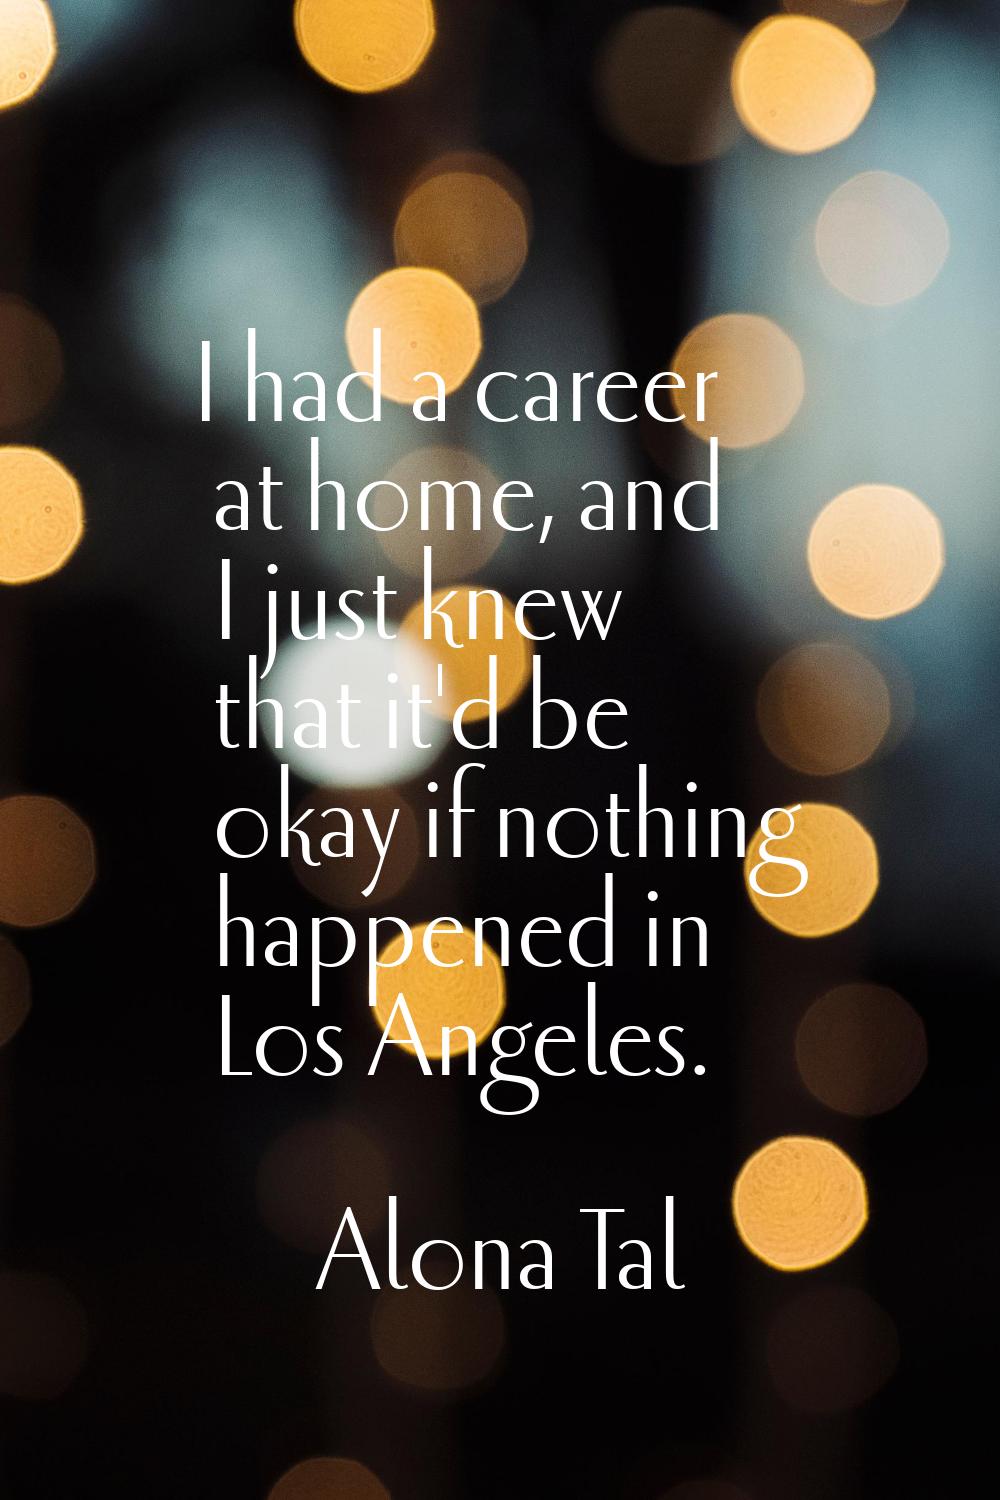 I had a career at home, and I just knew that it'd be okay if nothing happened in Los Angeles.